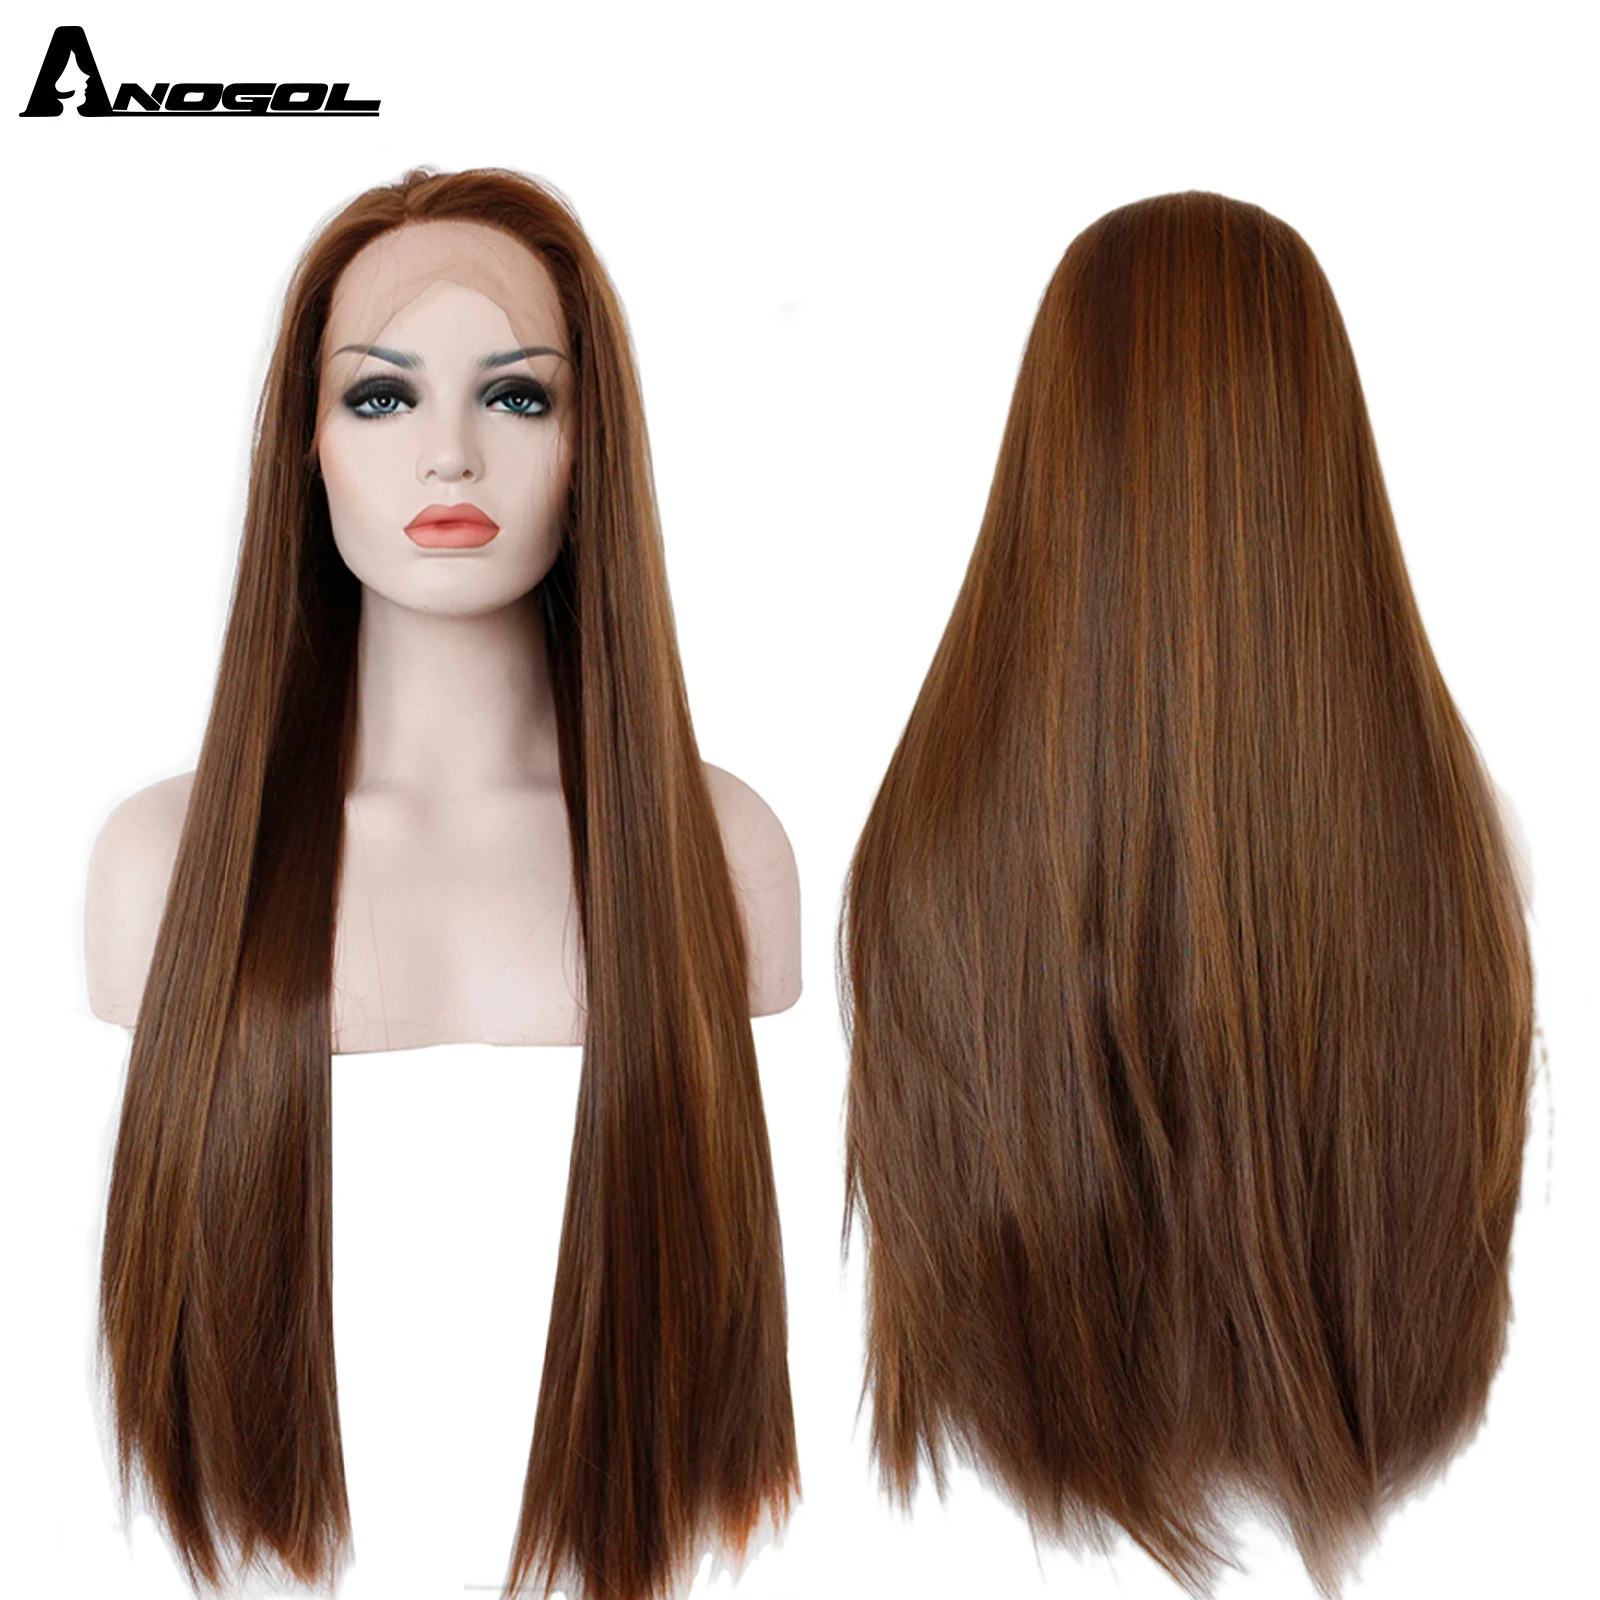 Anogol Dark Brown Lace Front Wig Natural Long Straight Glueless Synthetic High Temperature Heat Resistant Fiber Hair Women Wigs